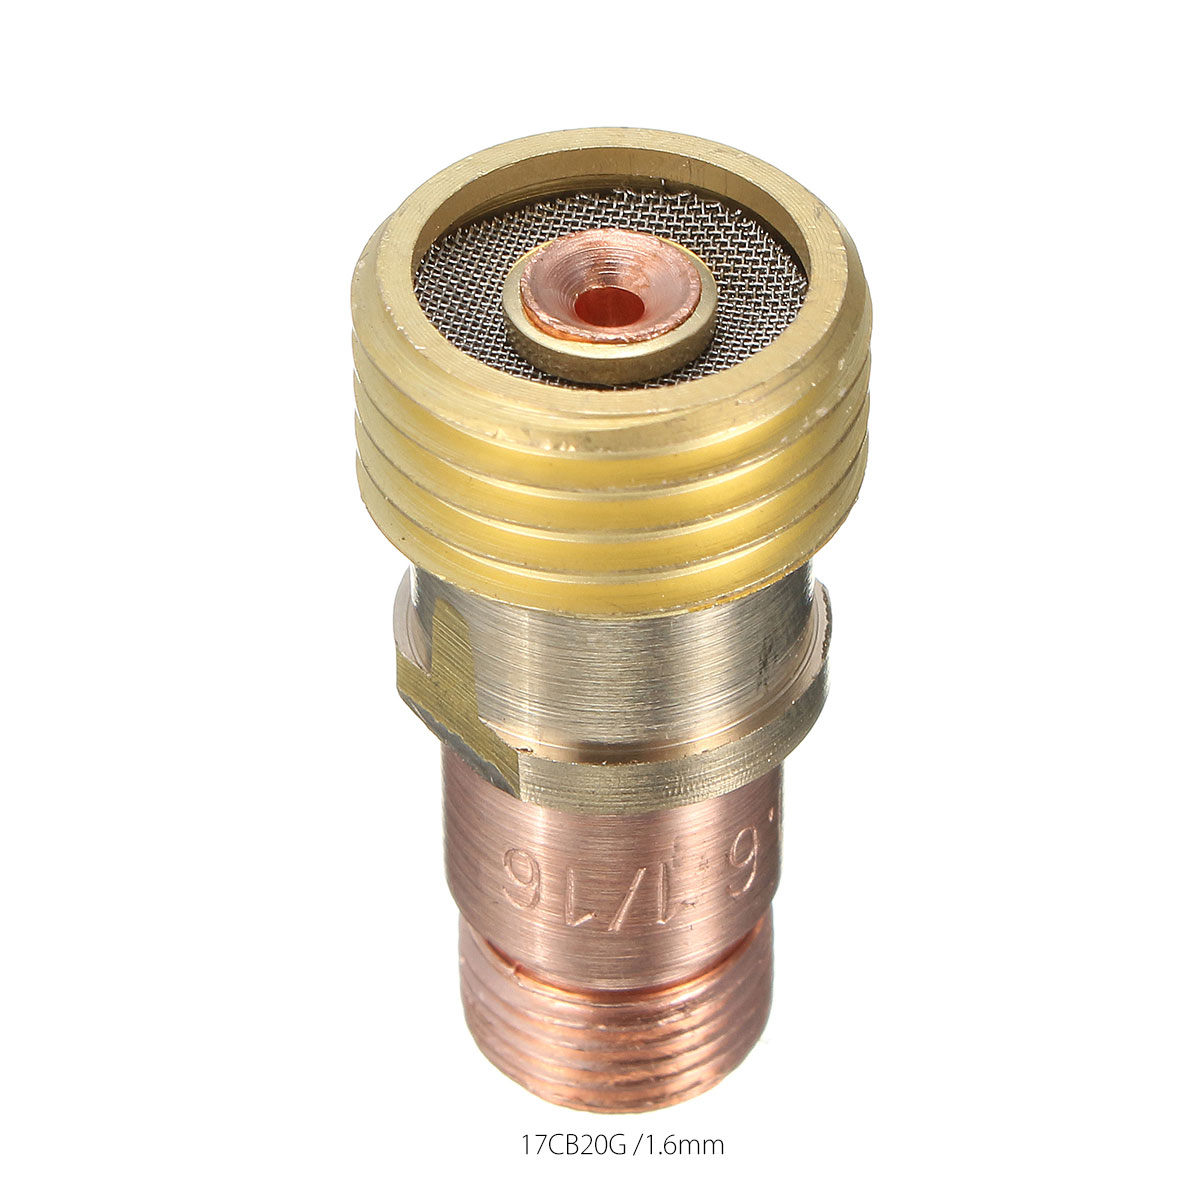 Brass-Collets-Stubby-Gas-Lens-Connector-With-Mesh-For-Tig-WP-171826-Torch-1138923-6